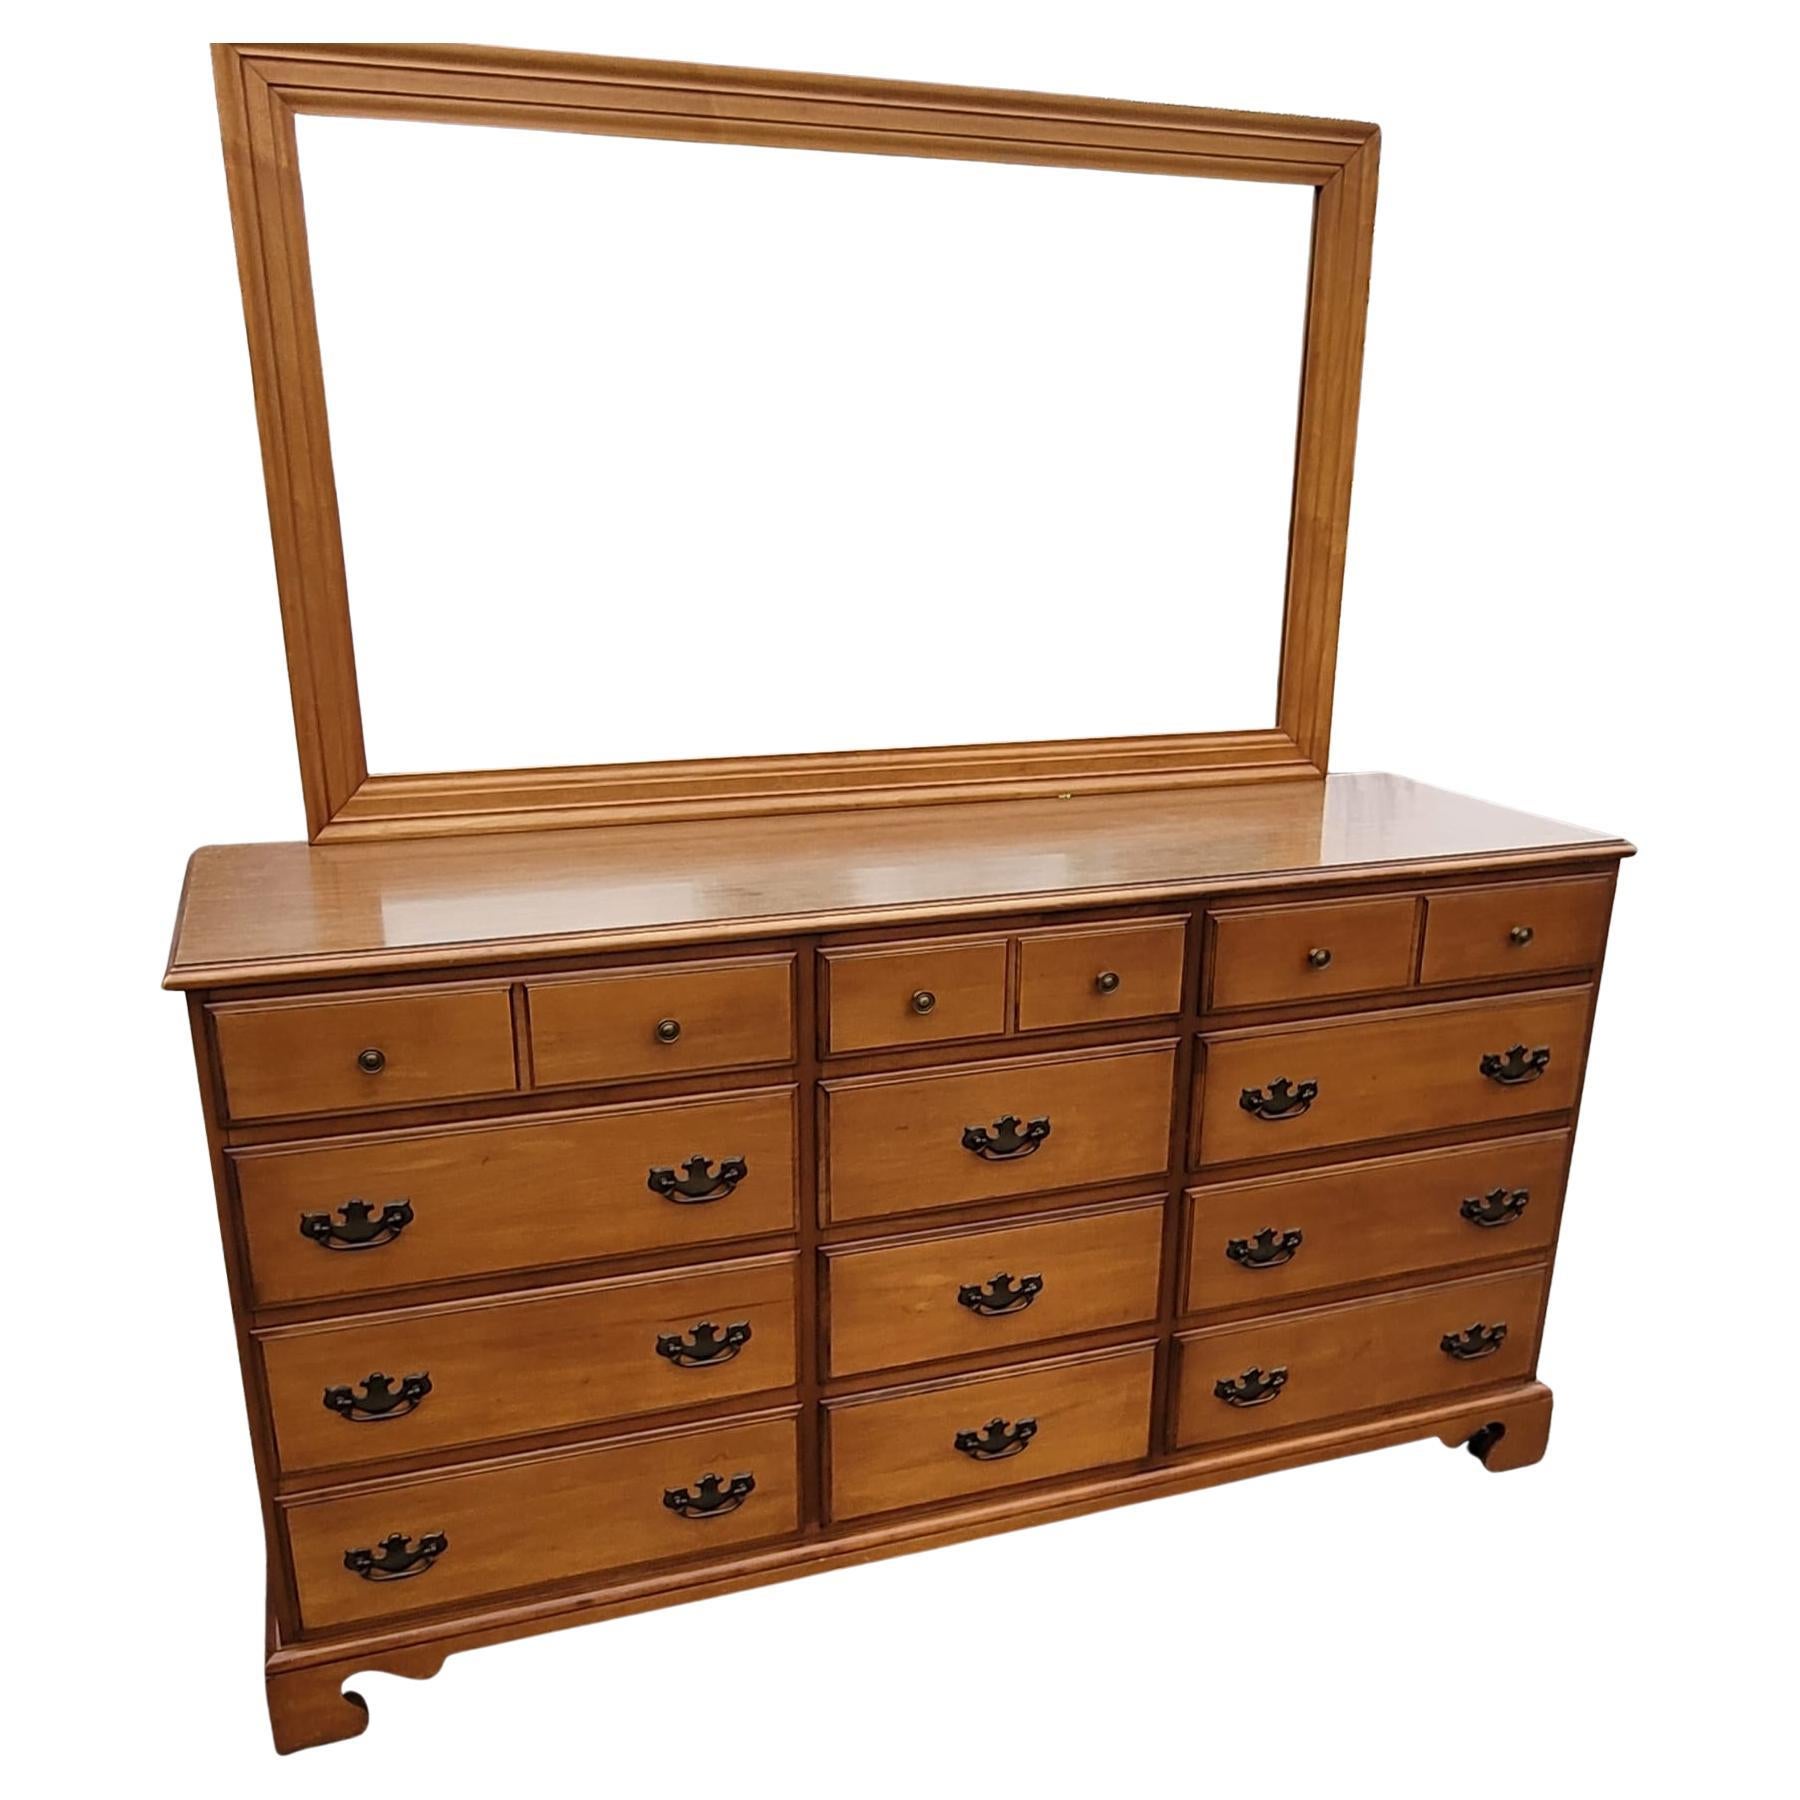 Beautiful set of Stanley's Distinctive Furniture Collection Maple dresser with Mirror and Chest of Drawers Set in great condition. Measures 66